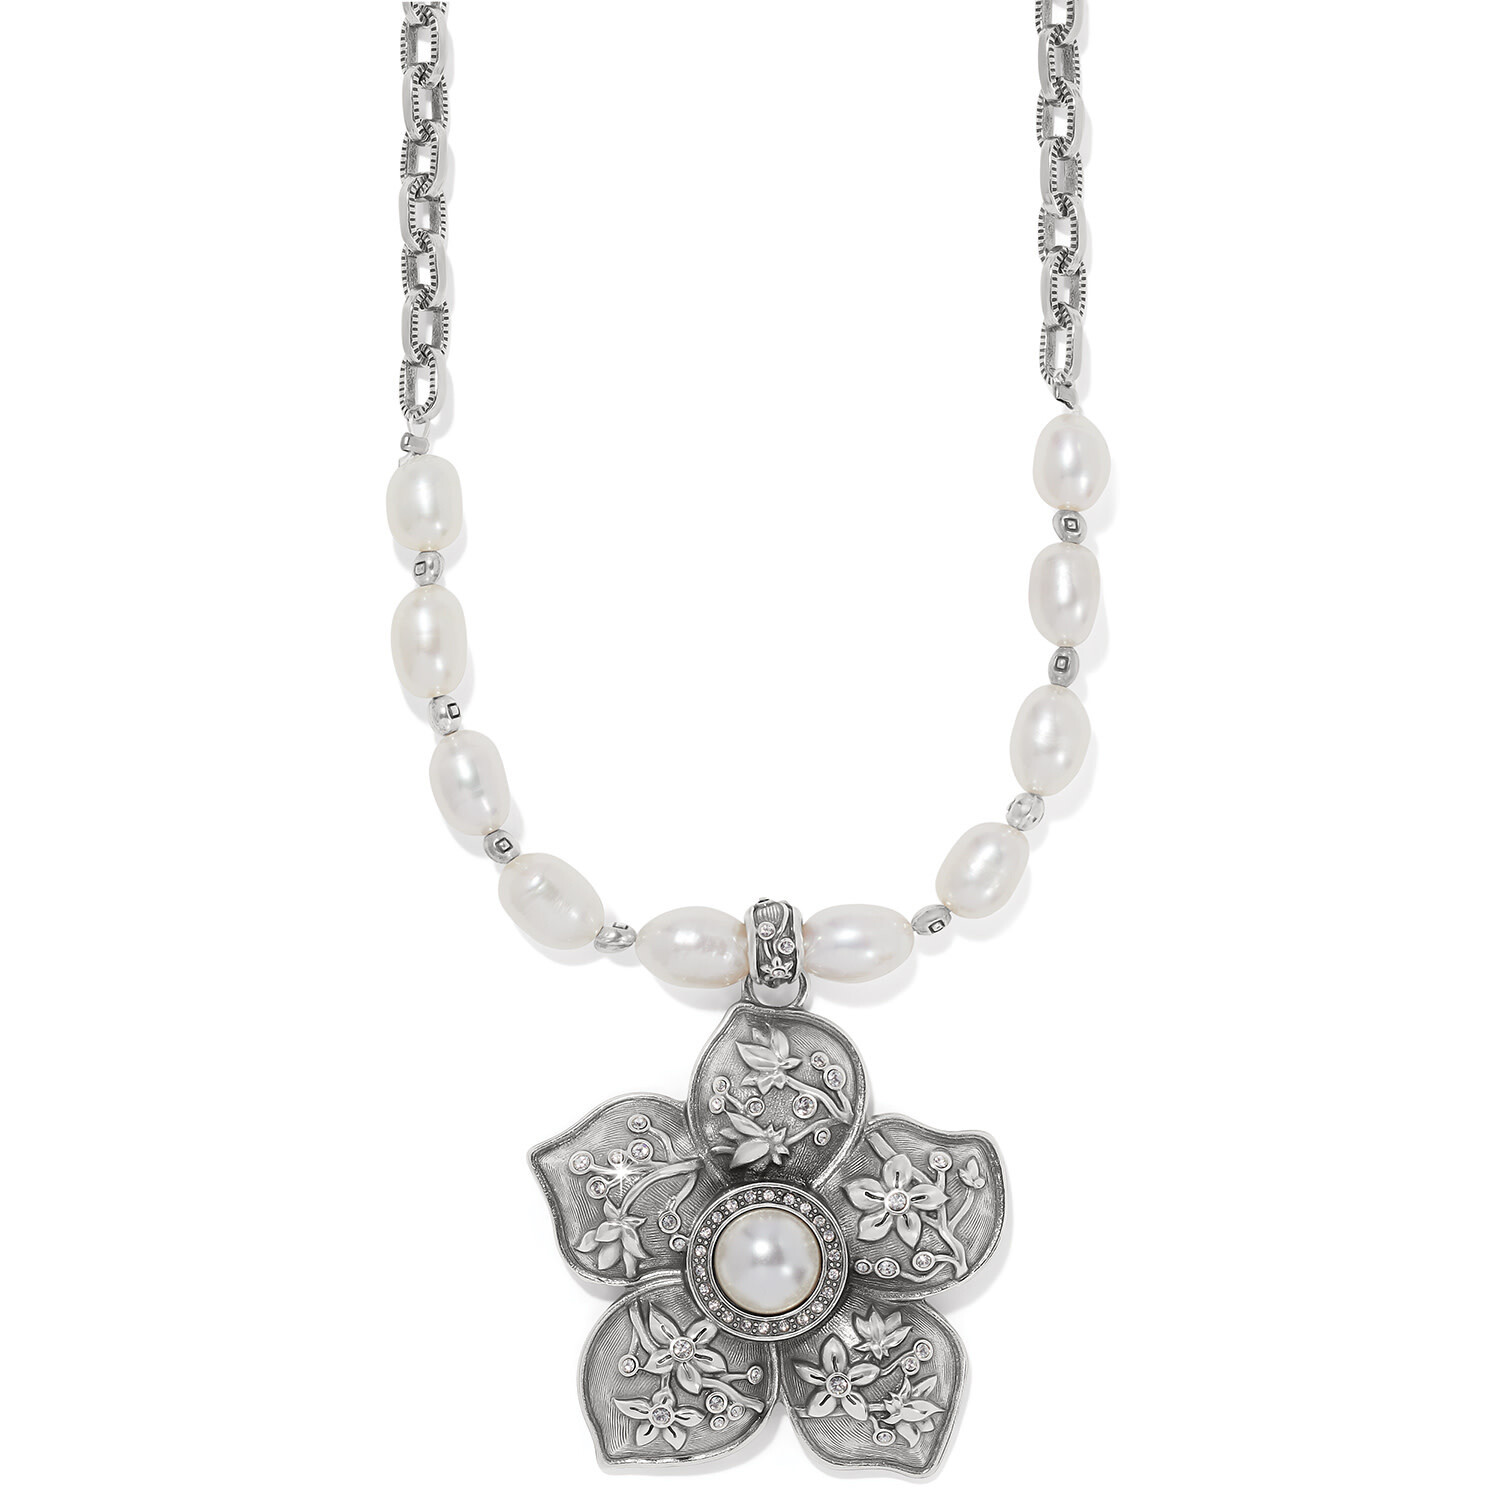 KYOTO IN BLOOM PEARL NECKLACE